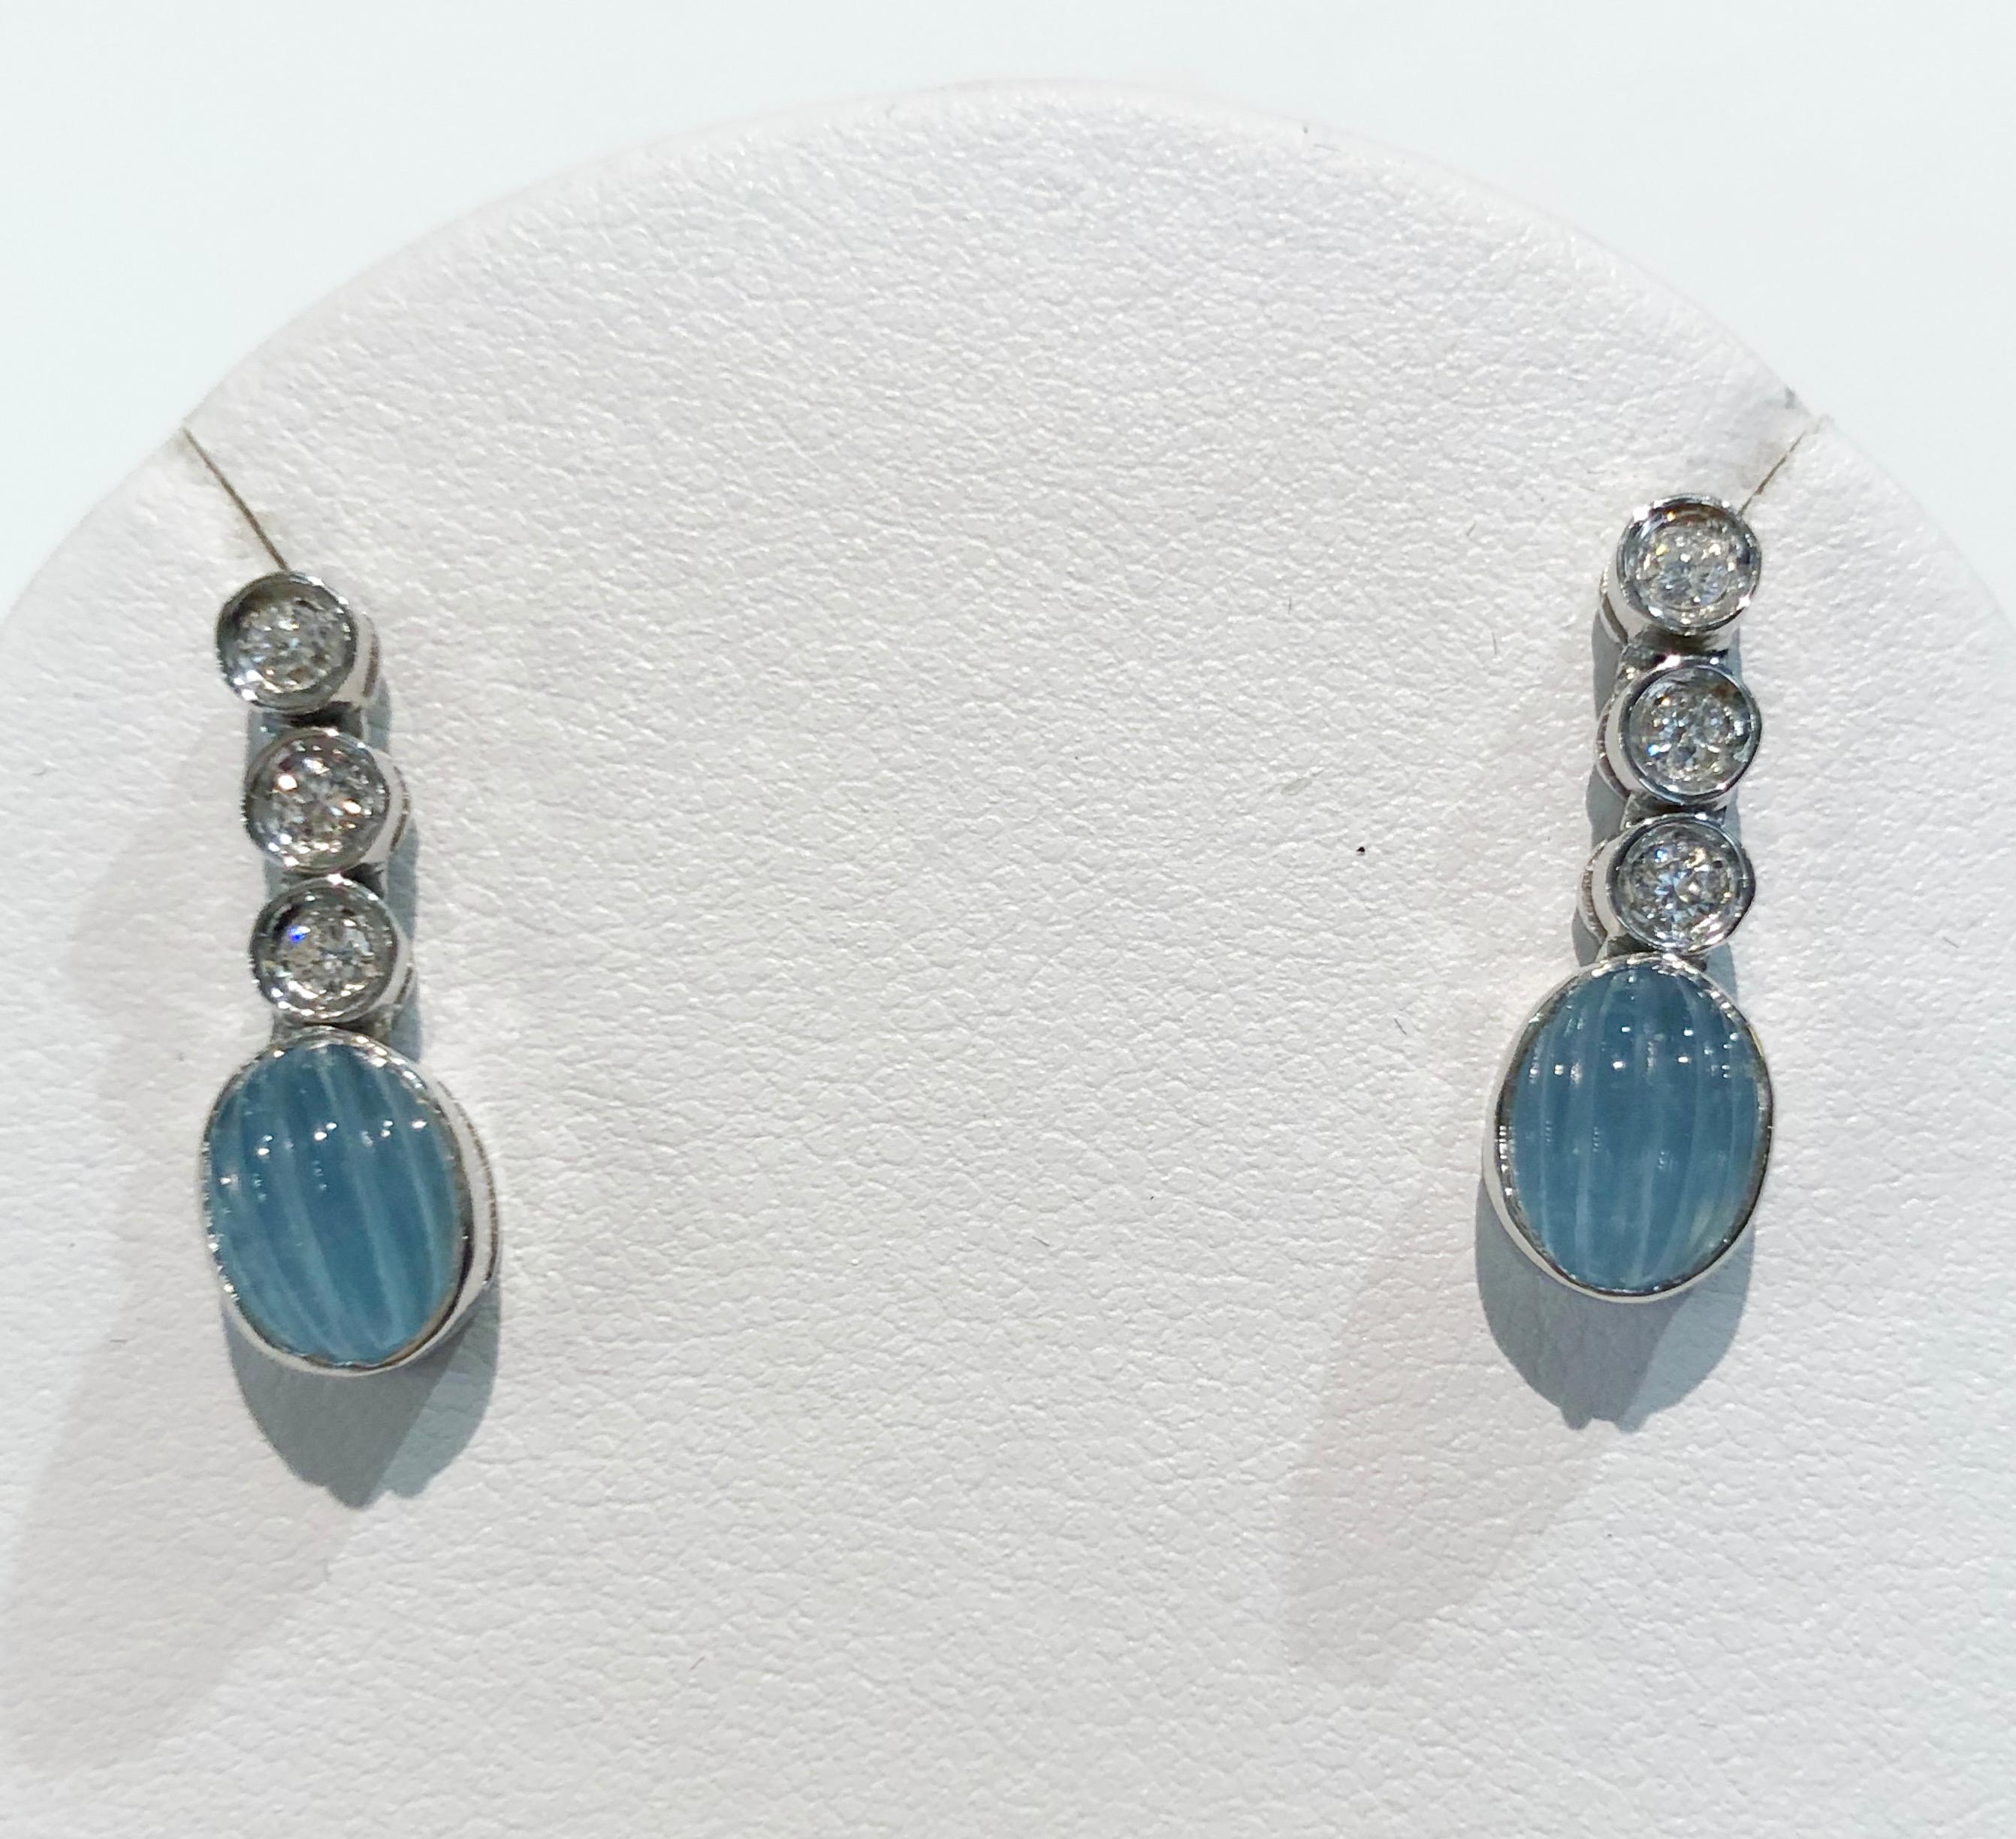 Pair of vintage earrings with 18 karat white gold, engraved aquamarine and brilliant diamonds, Italy 1970s
Length 2 cm